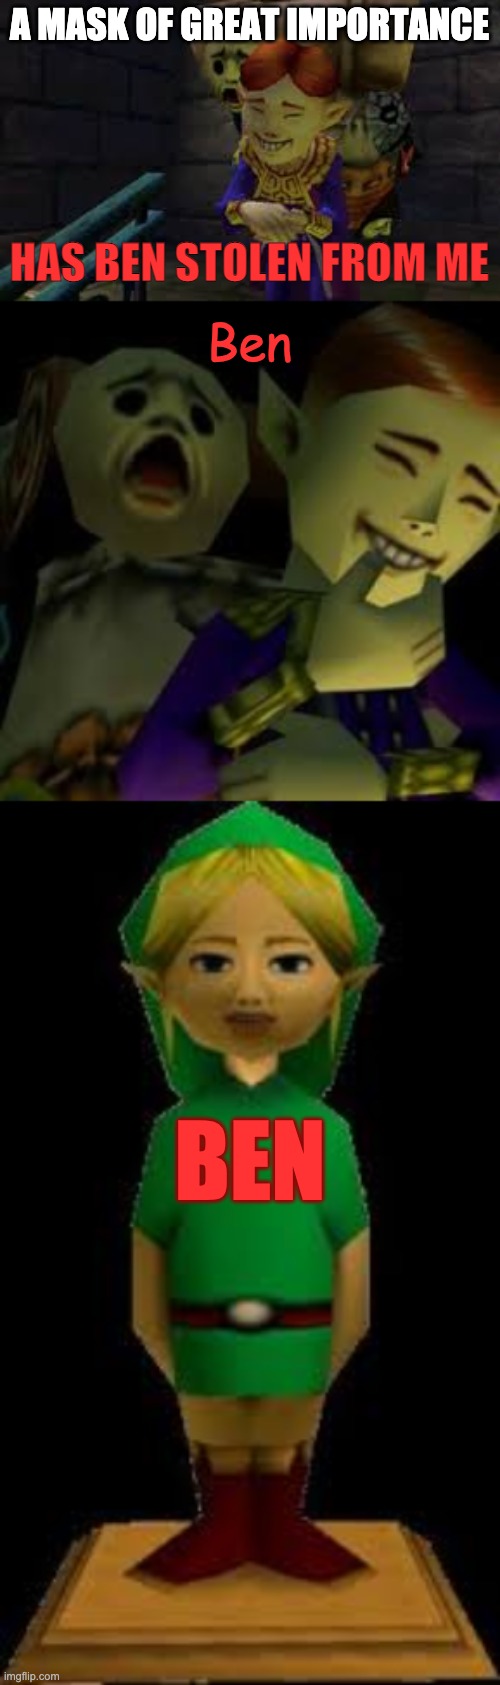 You Shouldn't Have Done That... | A MASK OF GREAT IMPORTANCE; HAS BEN STOLEN FROM ME; Ben; BEN | image tagged in majora's mask,legend of zelda,creepypasta | made w/ Imgflip meme maker